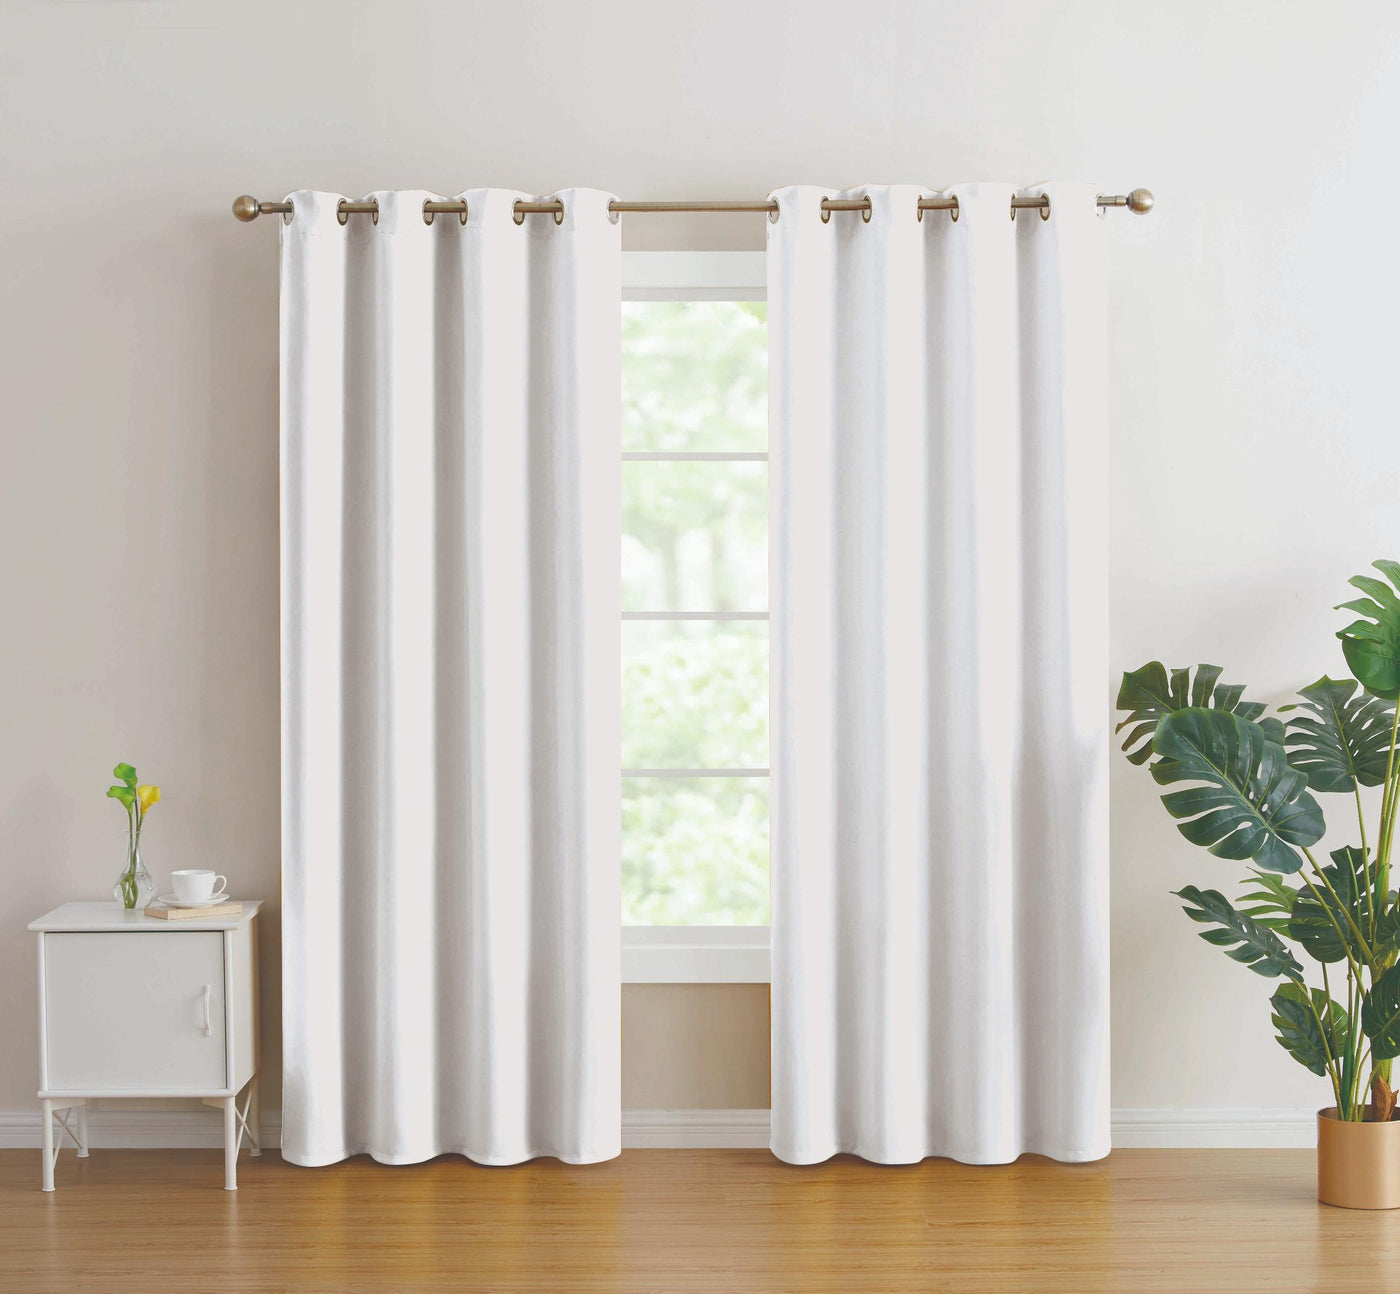 2pc Solid Grommet Thermal Insulated Window Curtain Panels Room Darkening Blackout 108"